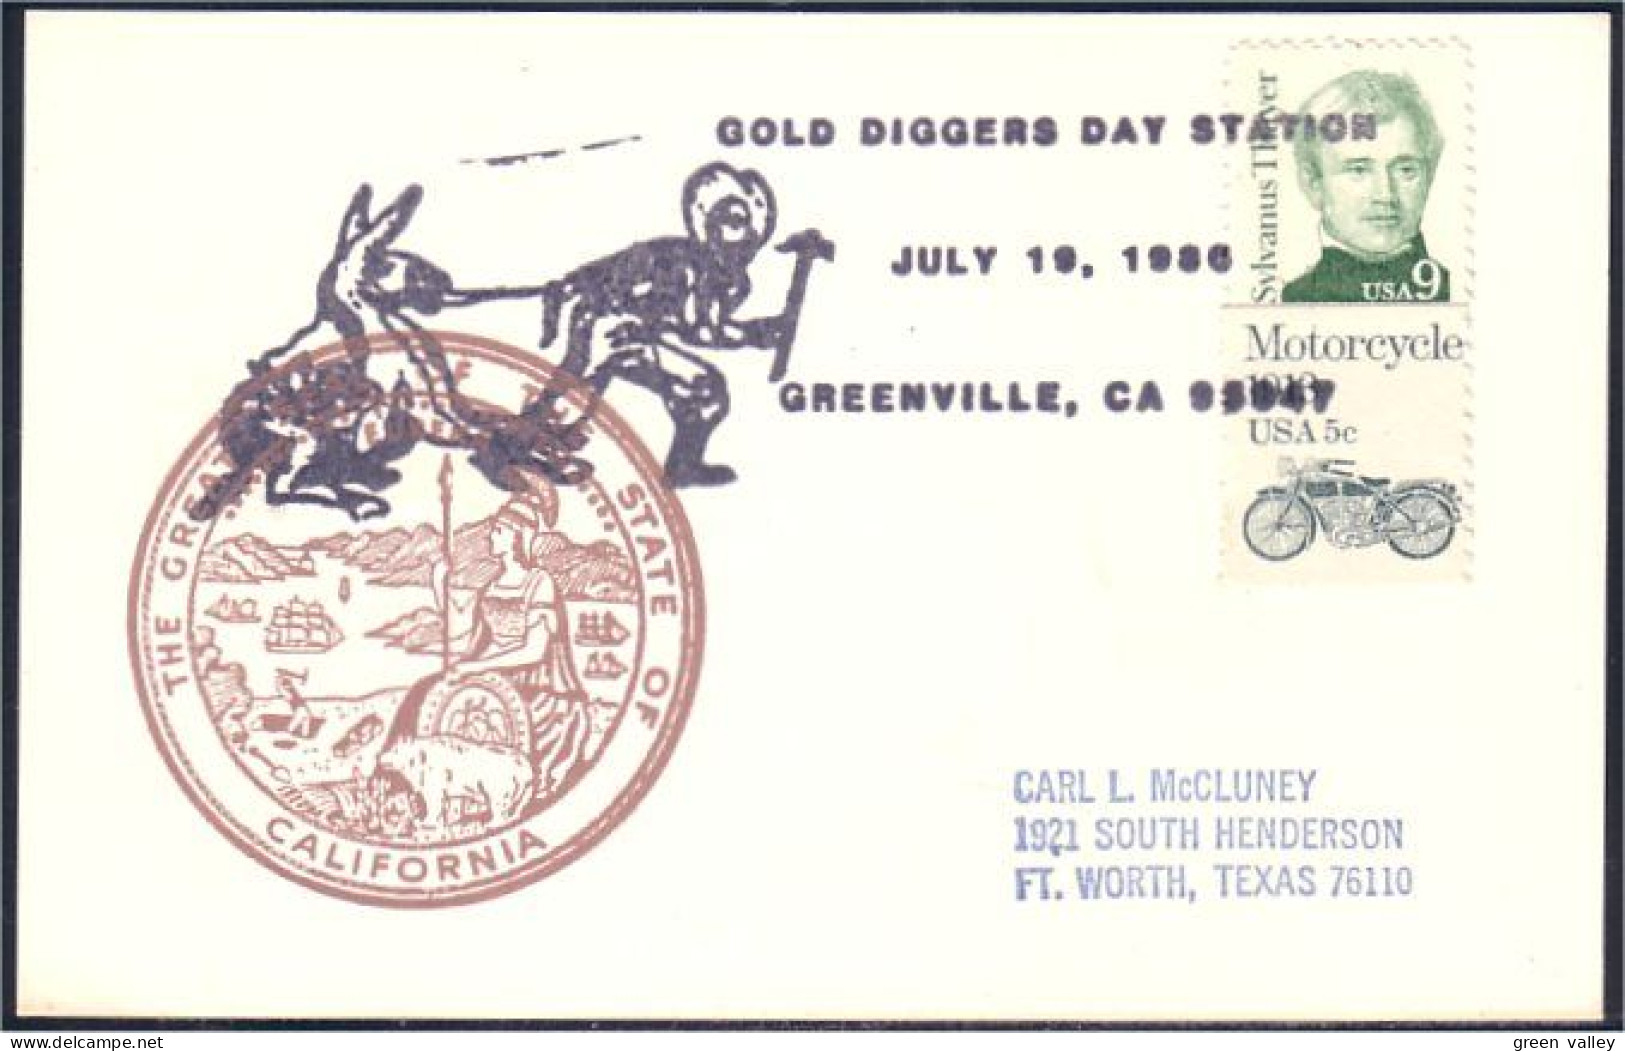 US Postcard Gold Diggers Day Greenville, CA JULY 19, 1986 ( A91 659) - Minerales